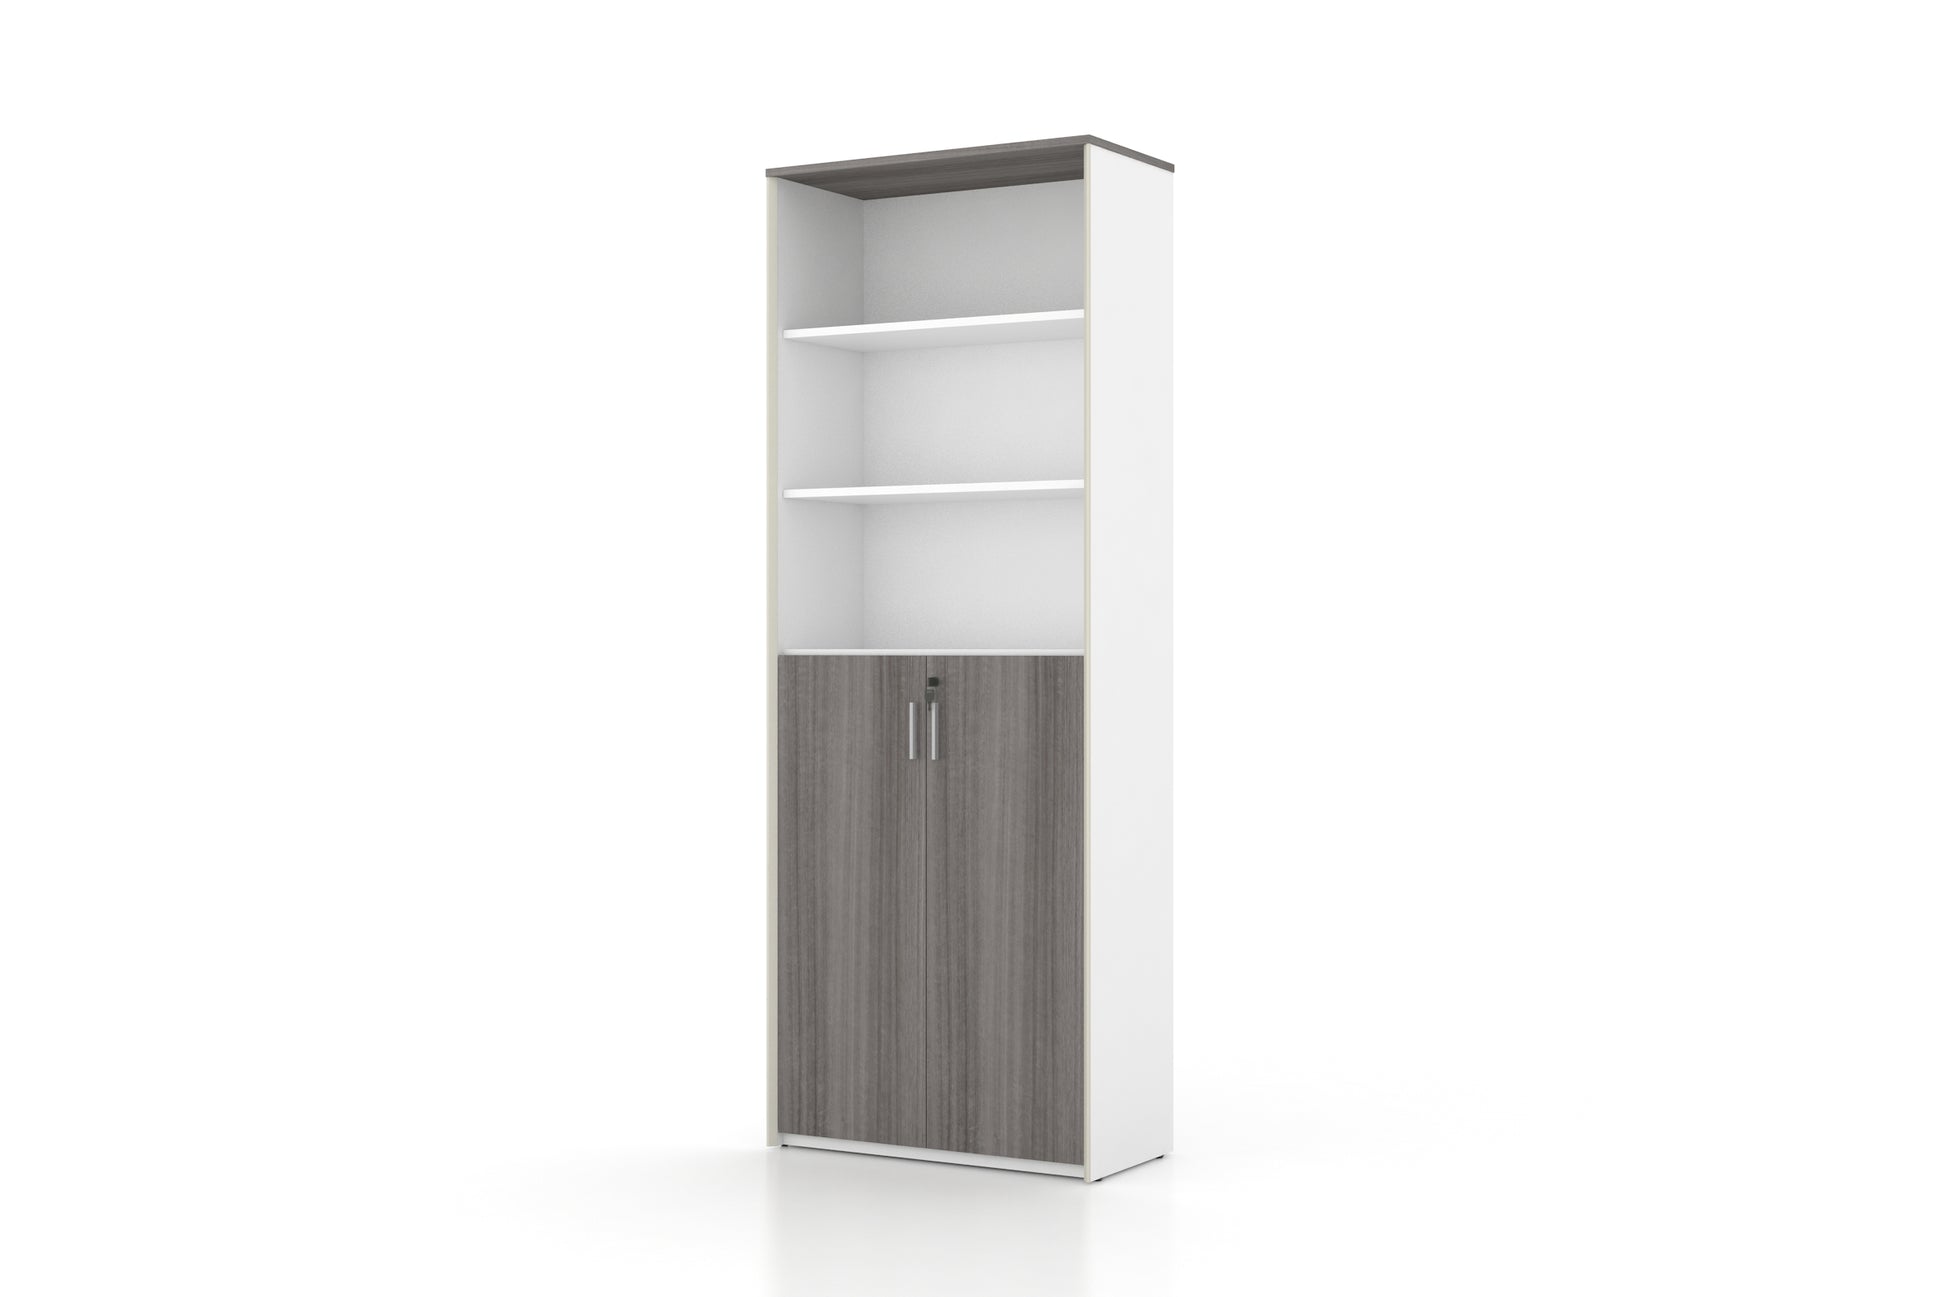 Universal 6-Level Cabinet (White Body) Consumer KANO CF12 Coffee Walnut Upper Shelves are Open 8-10 Weeks